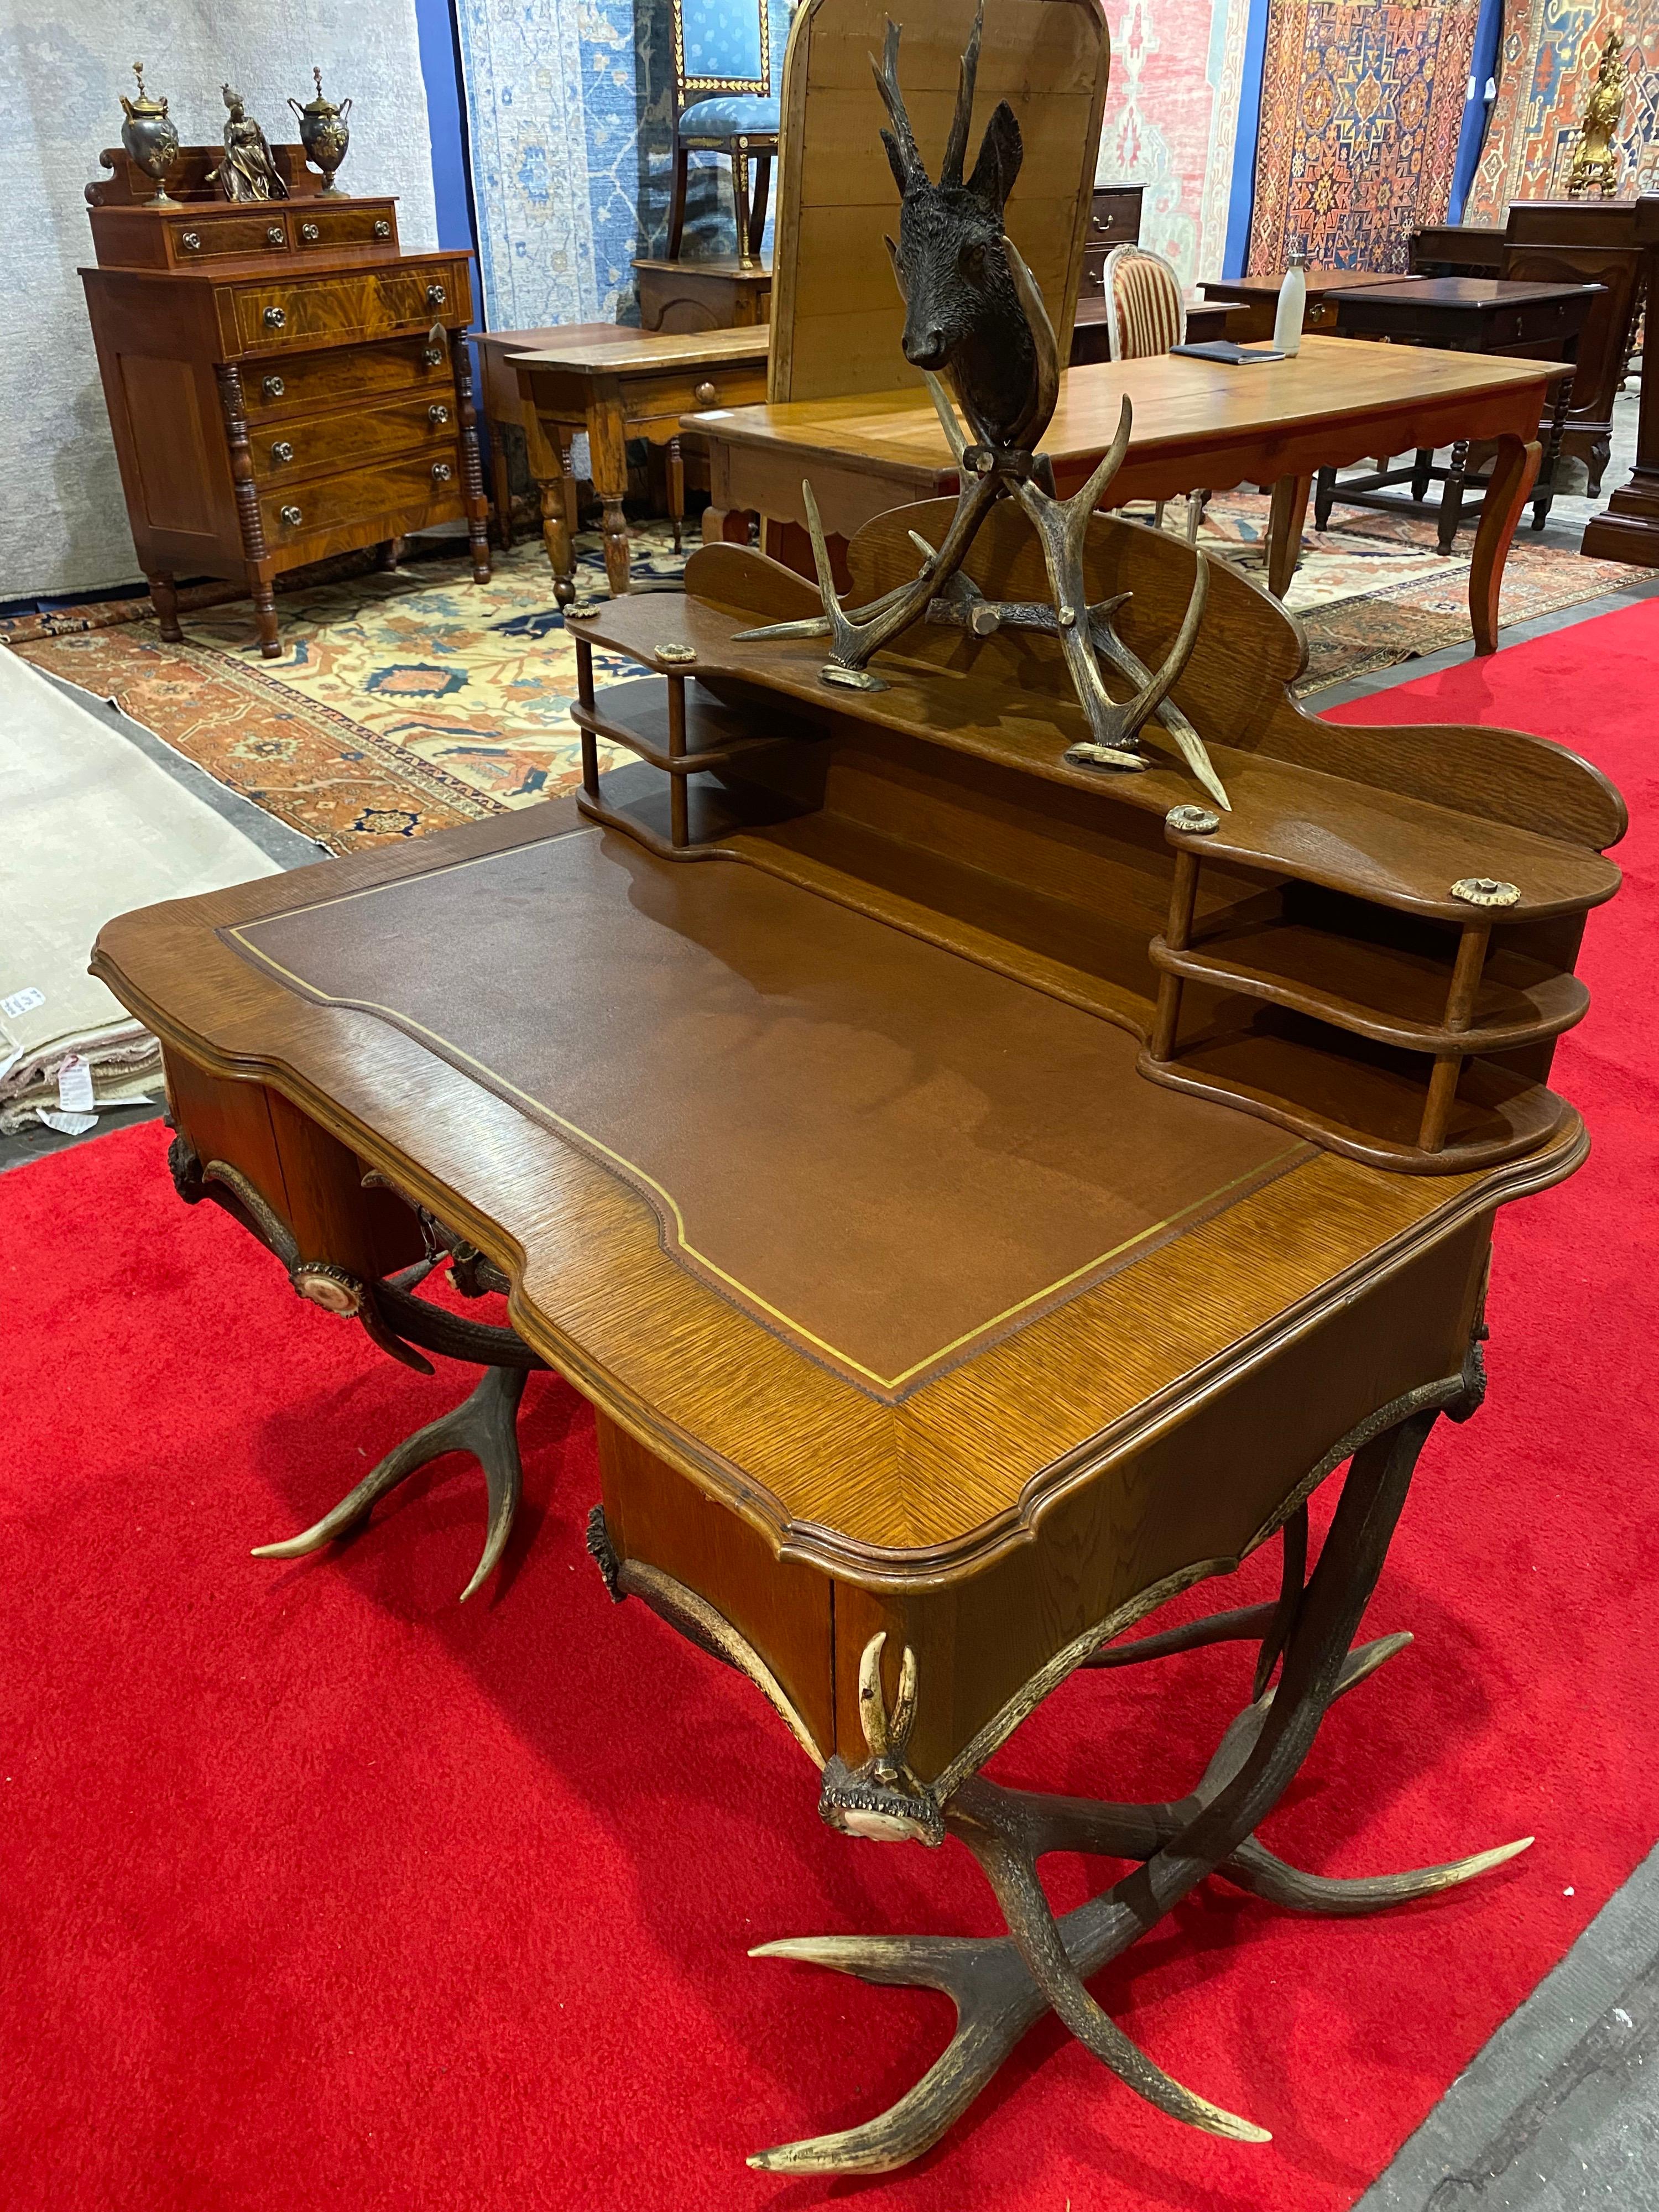 Impressive 19th century Black Forest leather top antler desk and removable shelf with a stags head. Desk is finished all around and can float in the center of the room. The shelf is meant to be hung on the wall but looks nice resting on the desk as